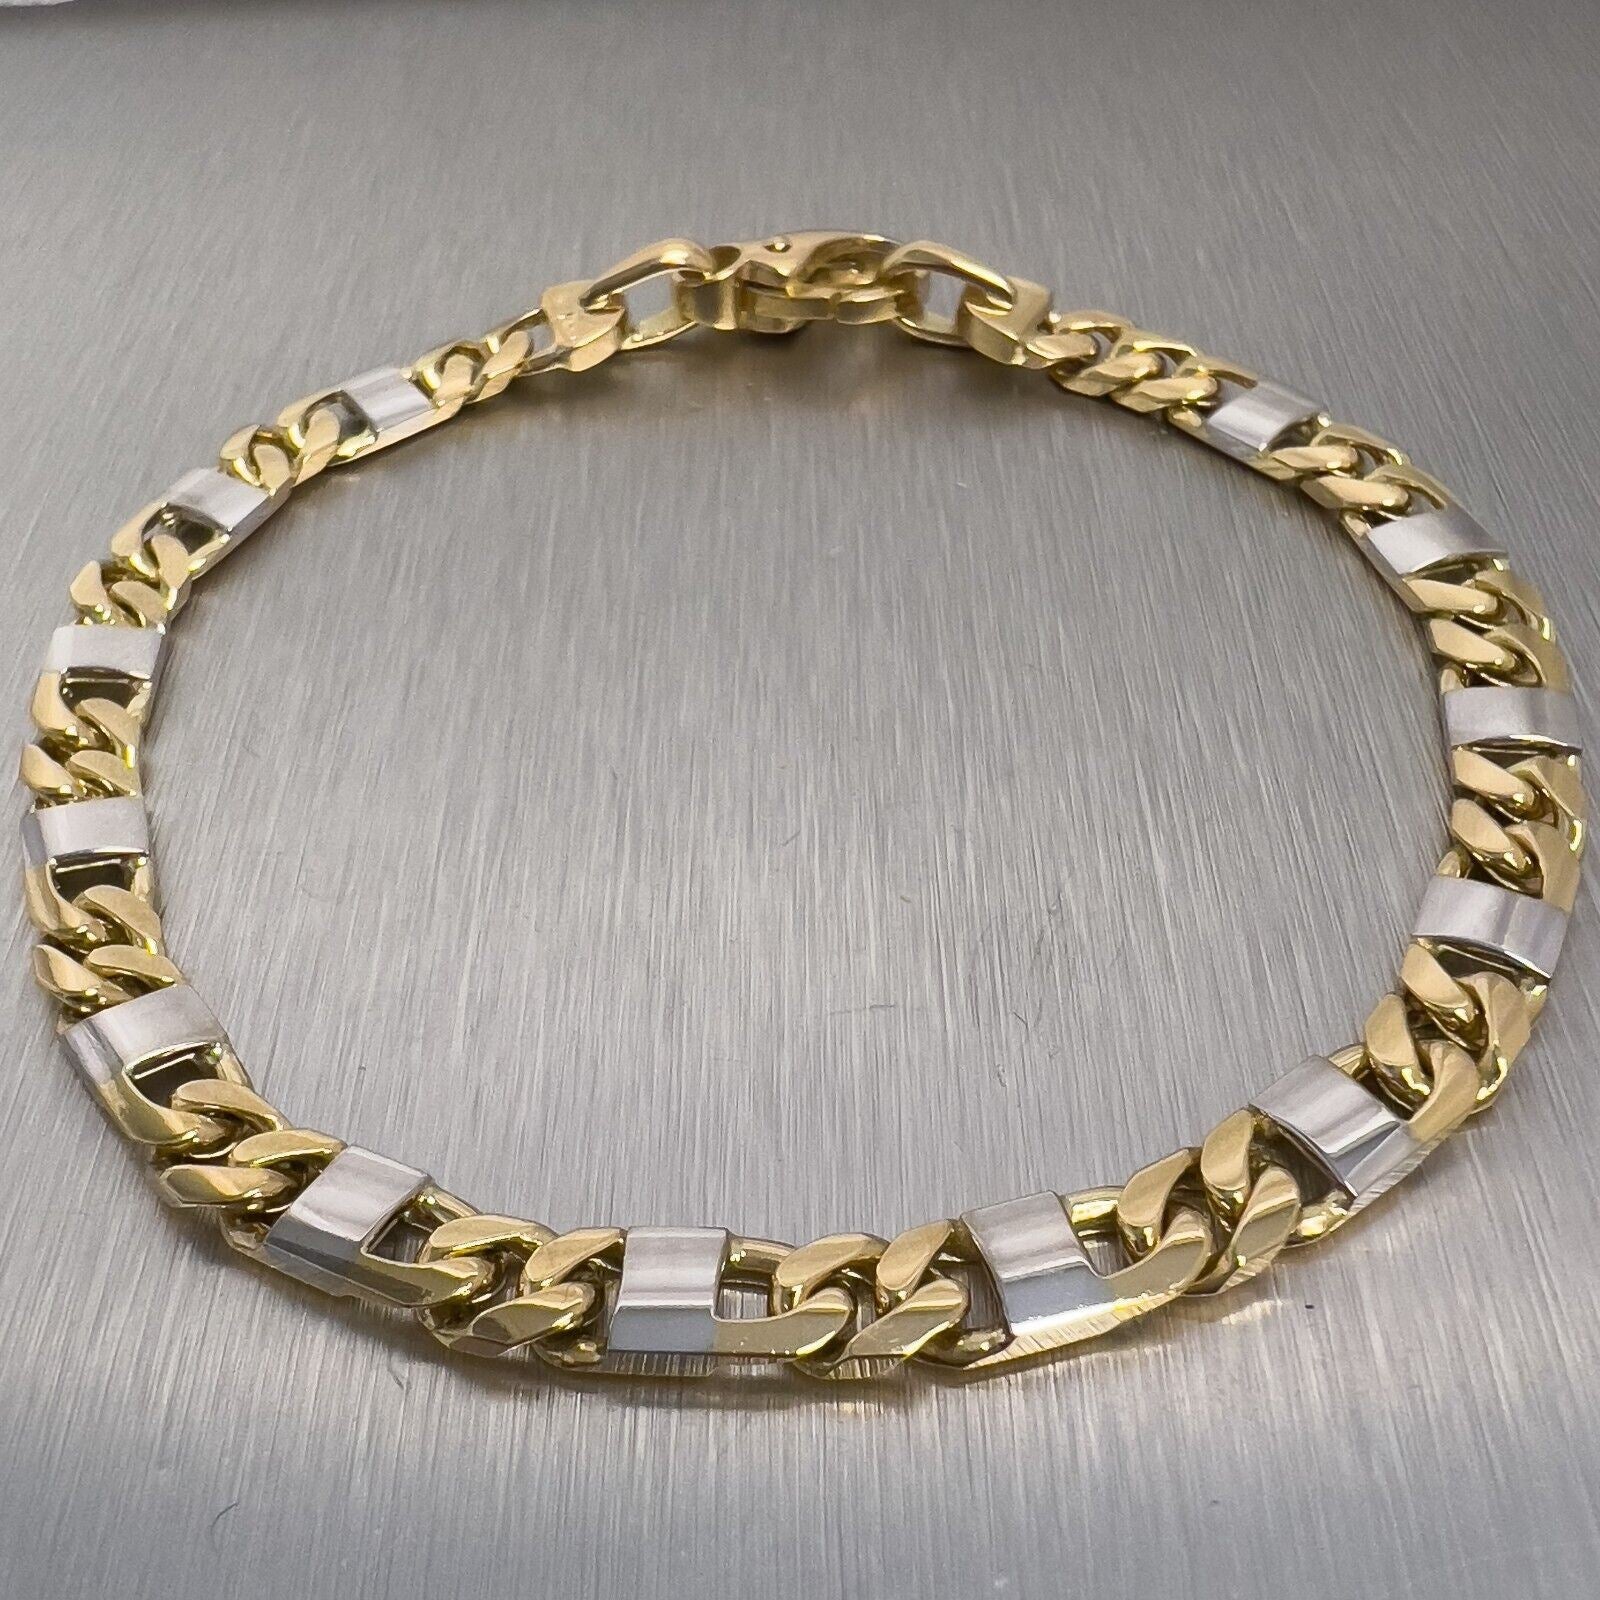 Reeds Jewelers 14K Yellow Gold Mariner Link Bracelet with Diamond Accents,  TDW 1.98